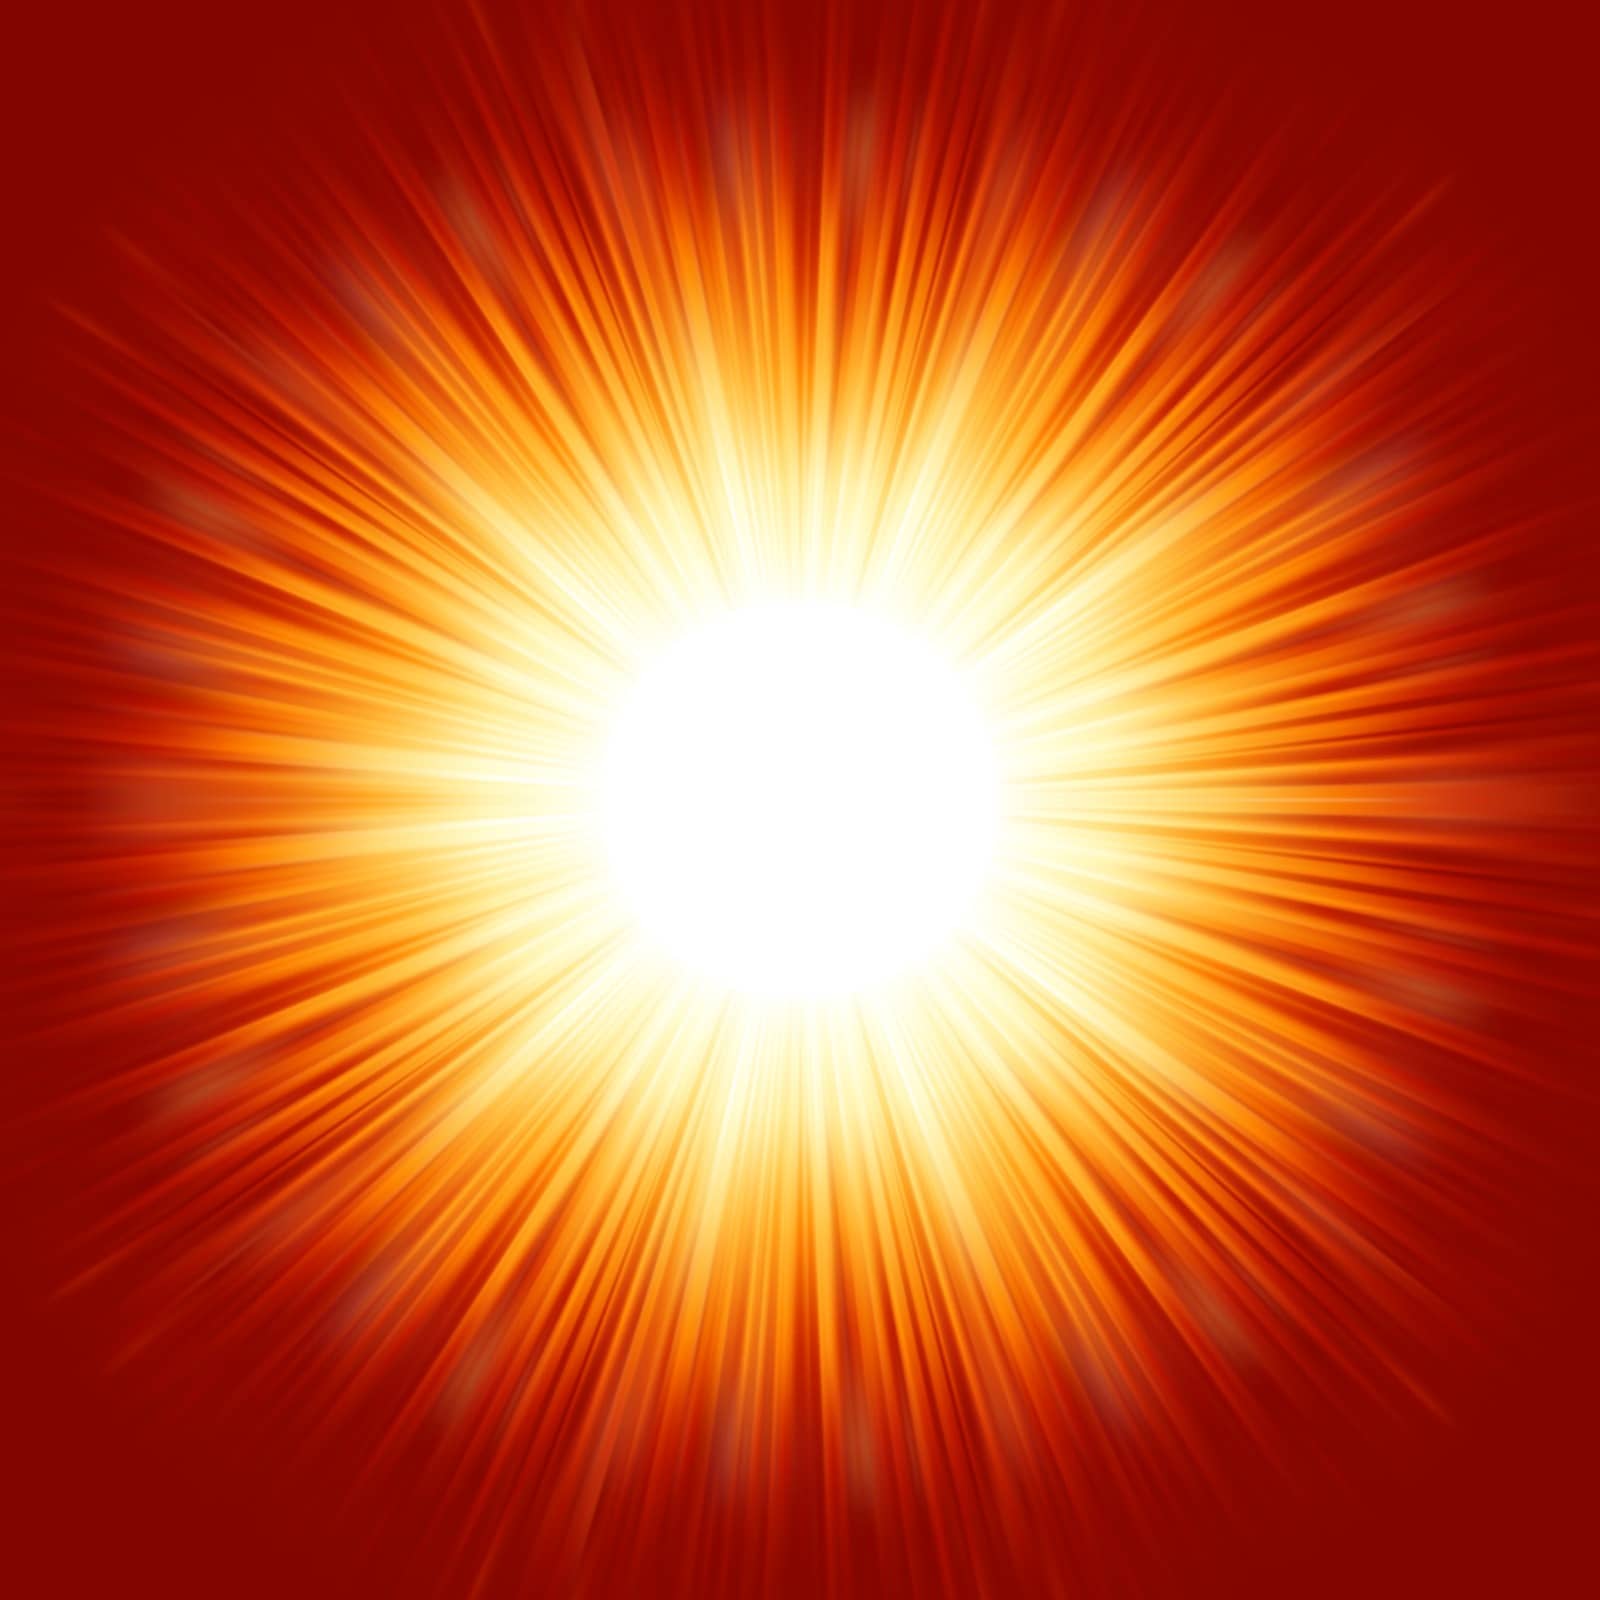 A bright exploding burst over a red background. EPS 8 vector file included